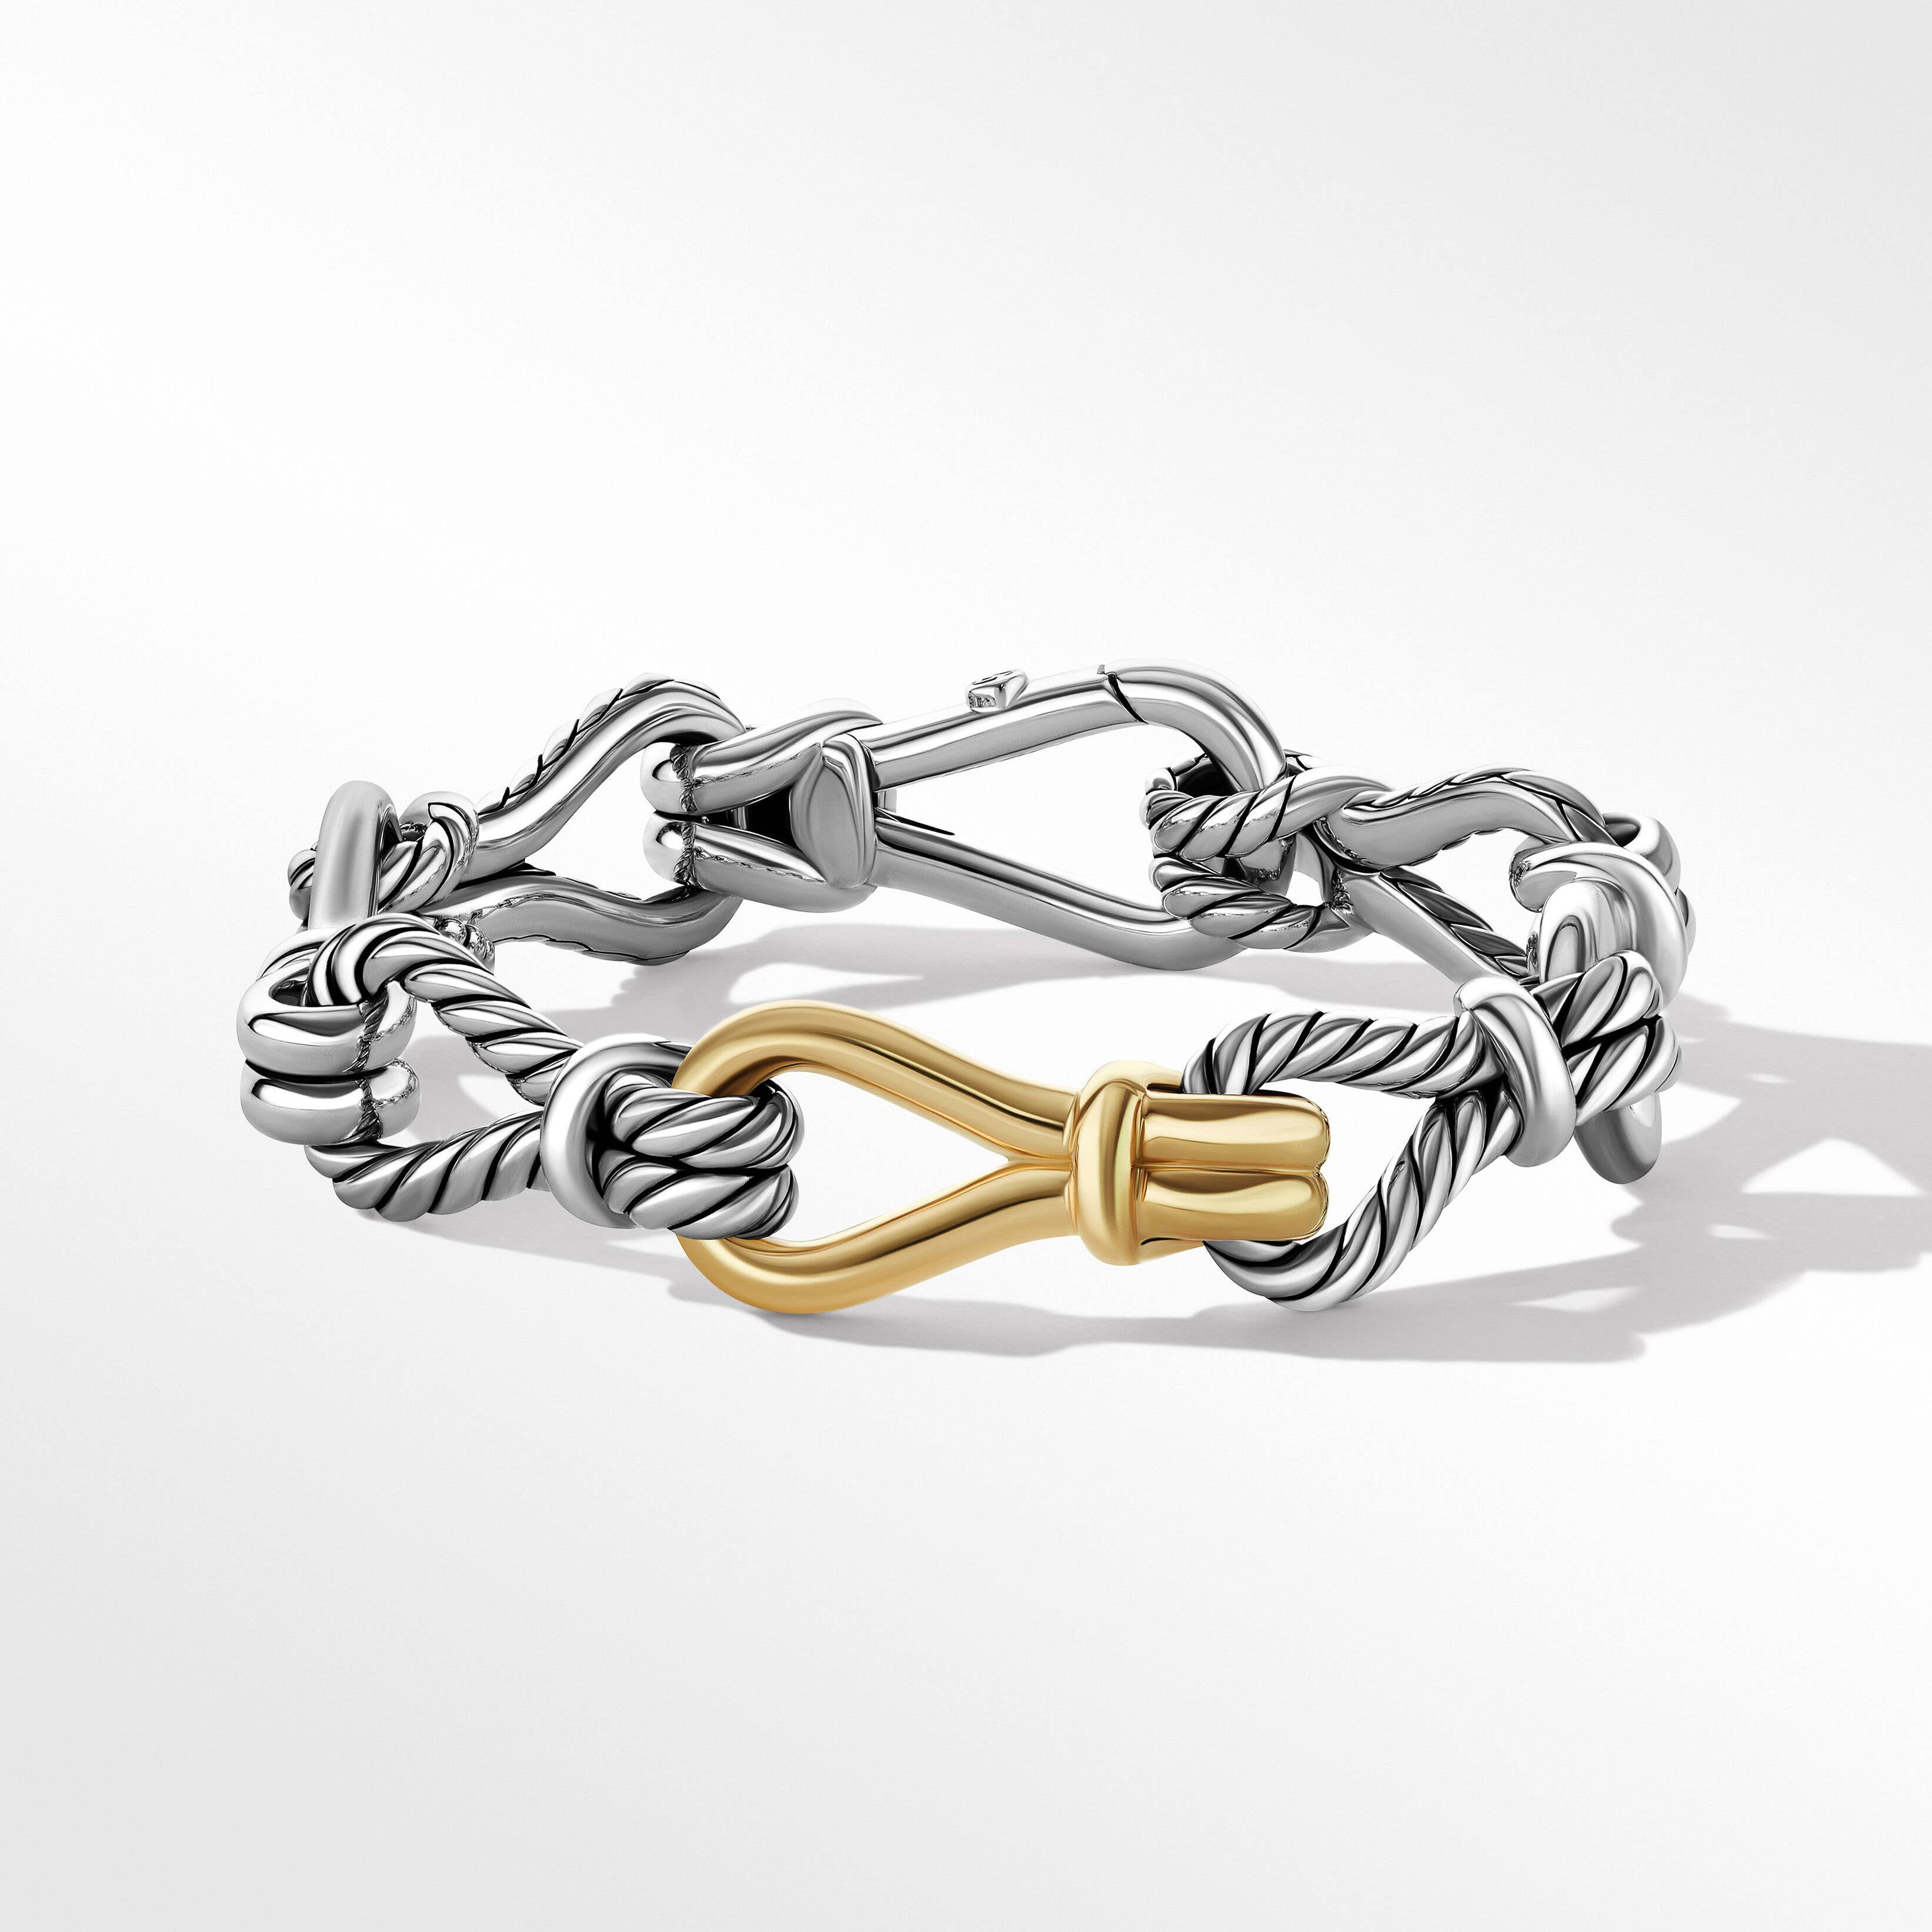 Thoroughbred Loop Chain Bracelet in Sterling Silver with 18K Yellow Gold